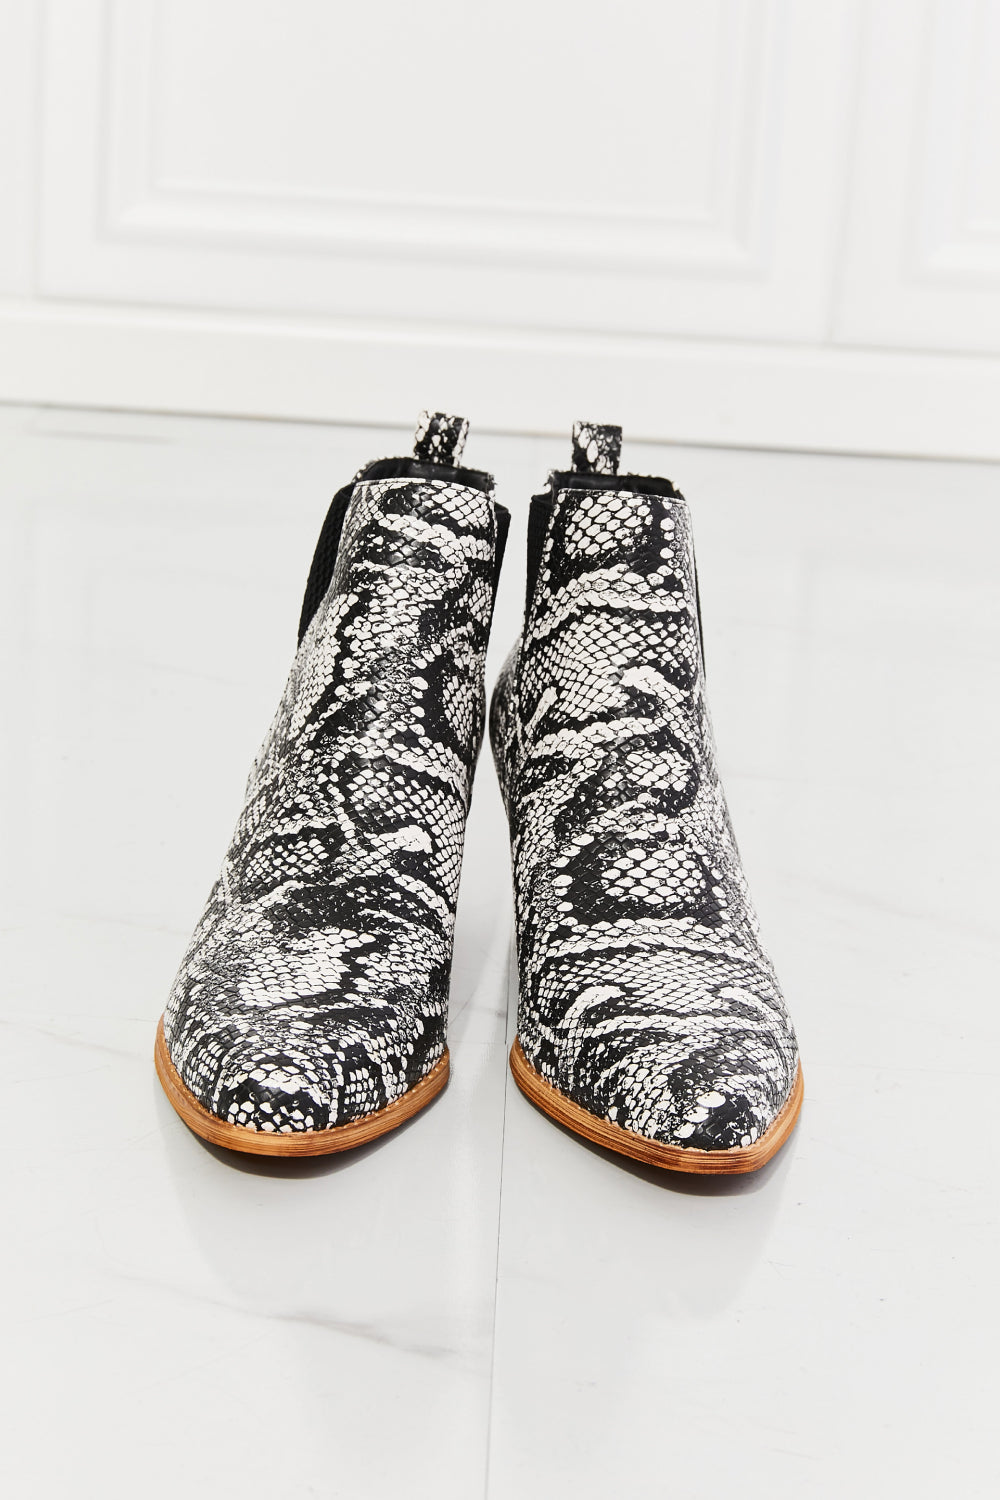 MMShoes Back At It Point Toe Bootie in Snakeskin - Tigbul's Fashion